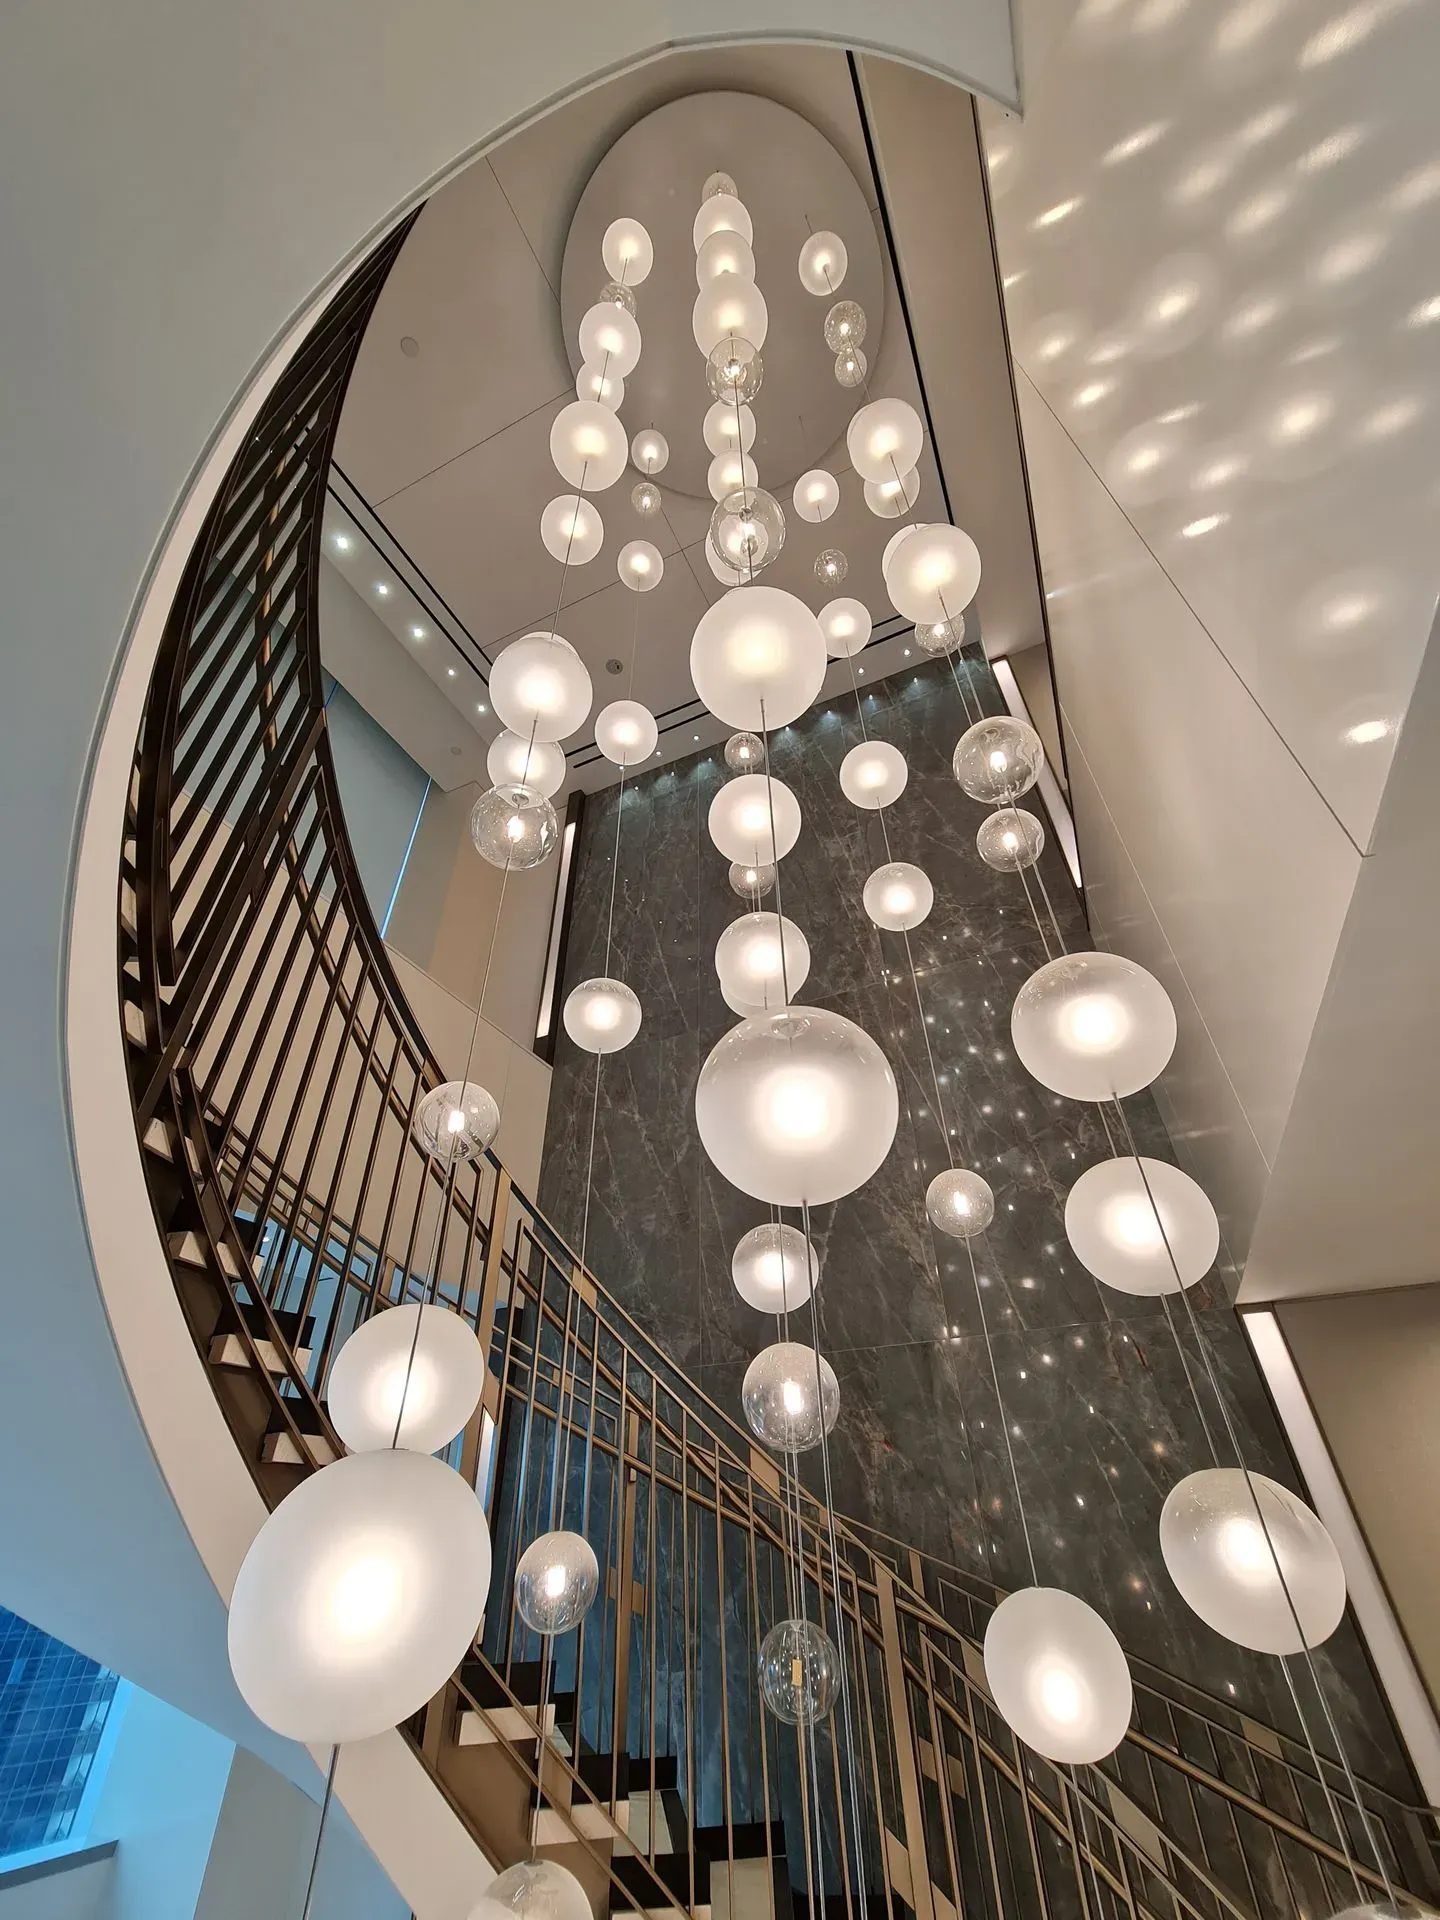 FOSALI tall modular modern LED chandelier on tall staircase in commercial centre or hotel